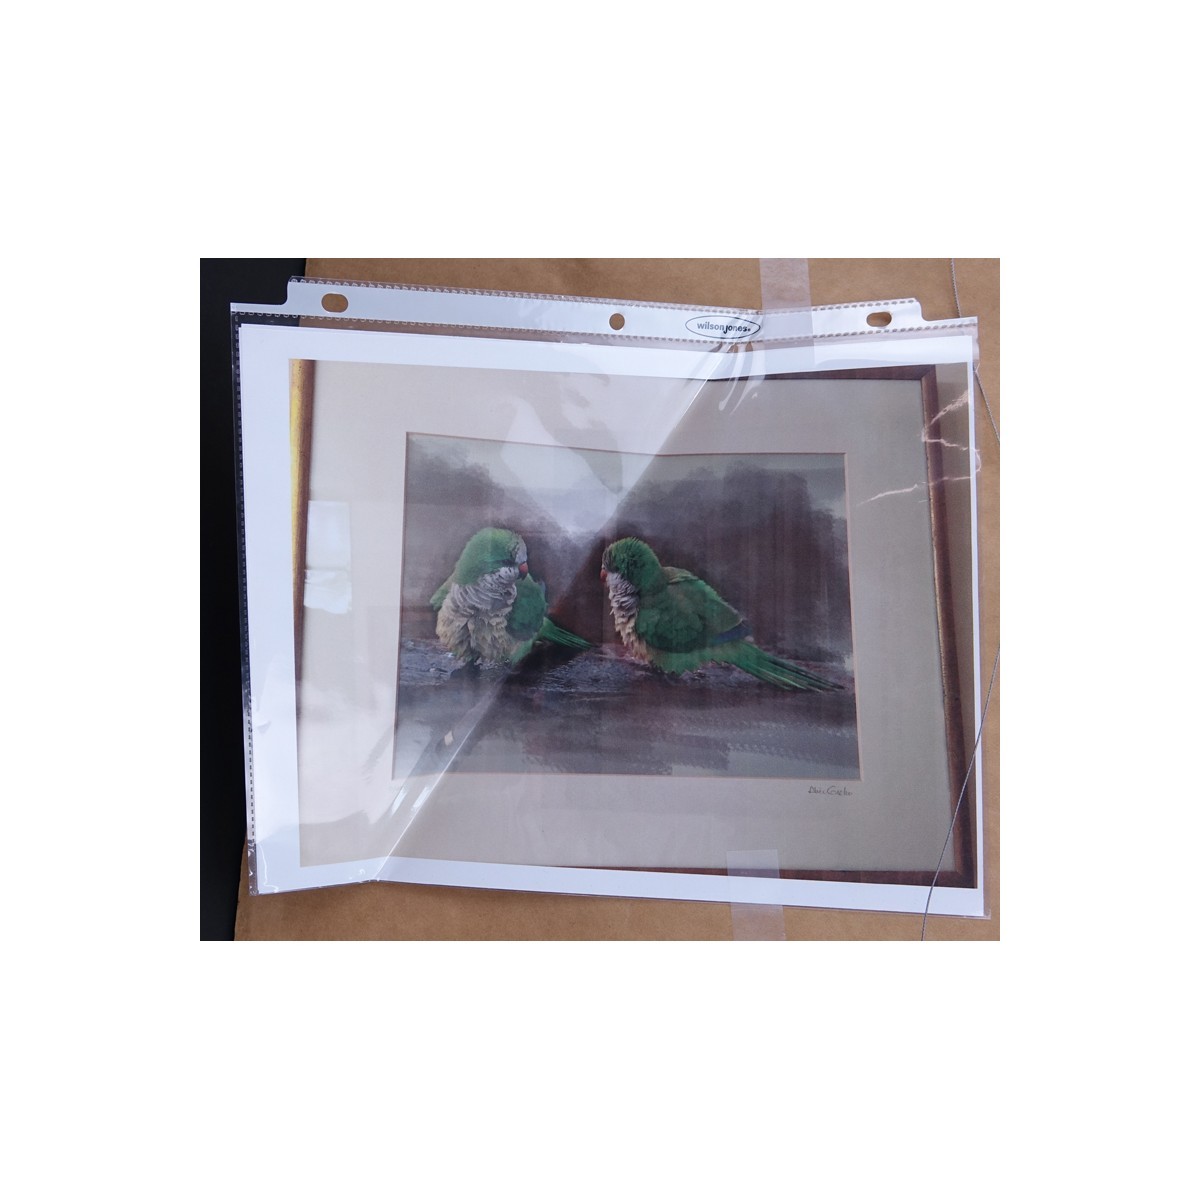 Alice Greko (20th C.) Photo and Digital Paintbrush "Florida Parrots" Signed and Numbered 3/40 in Pencil. Good condition.